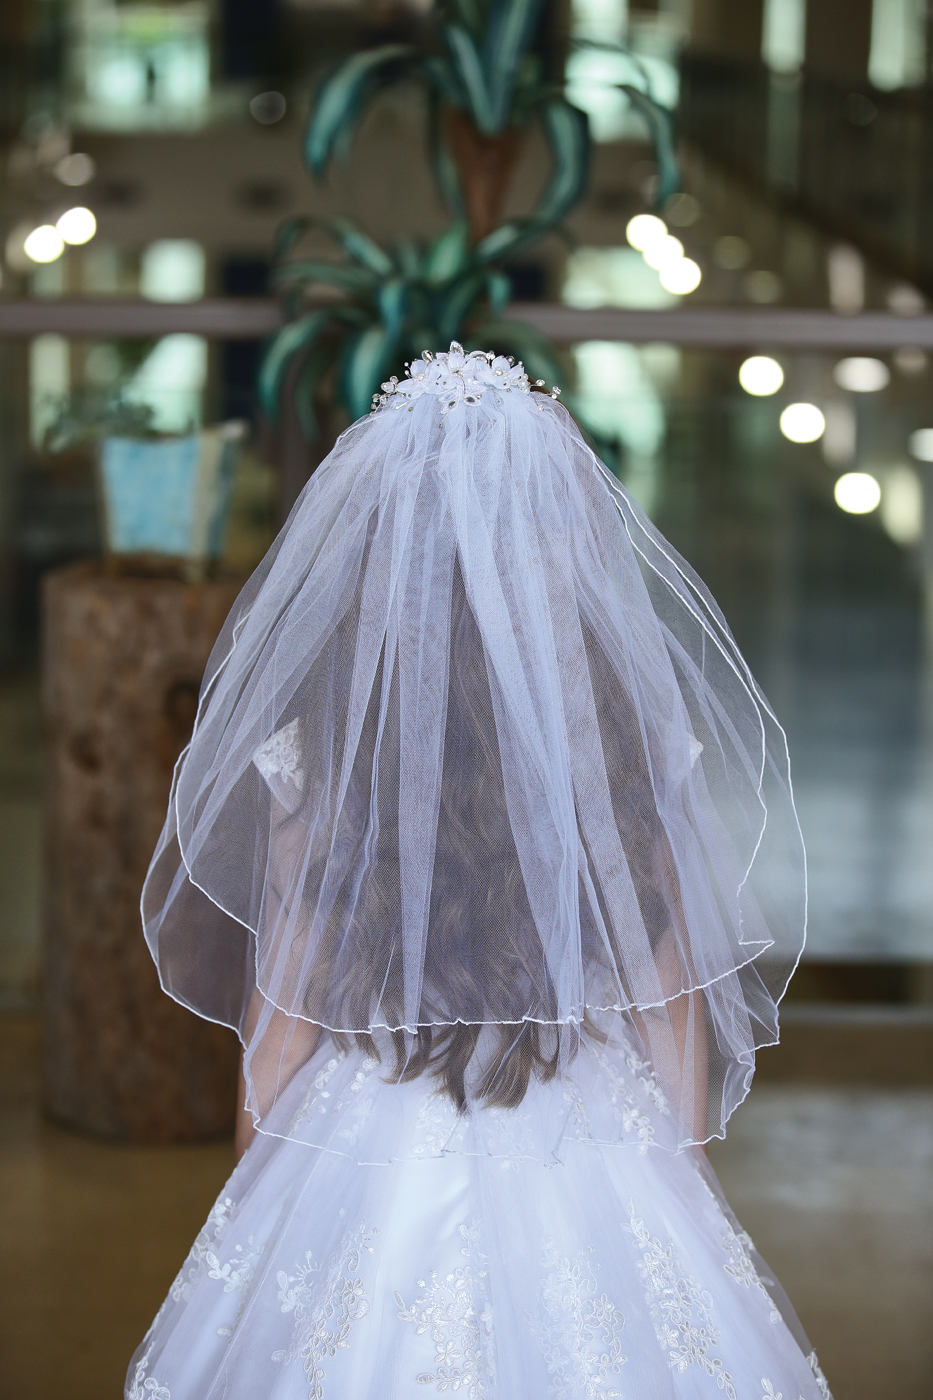 First Communion Veil with Flowers and Crystals on Comb